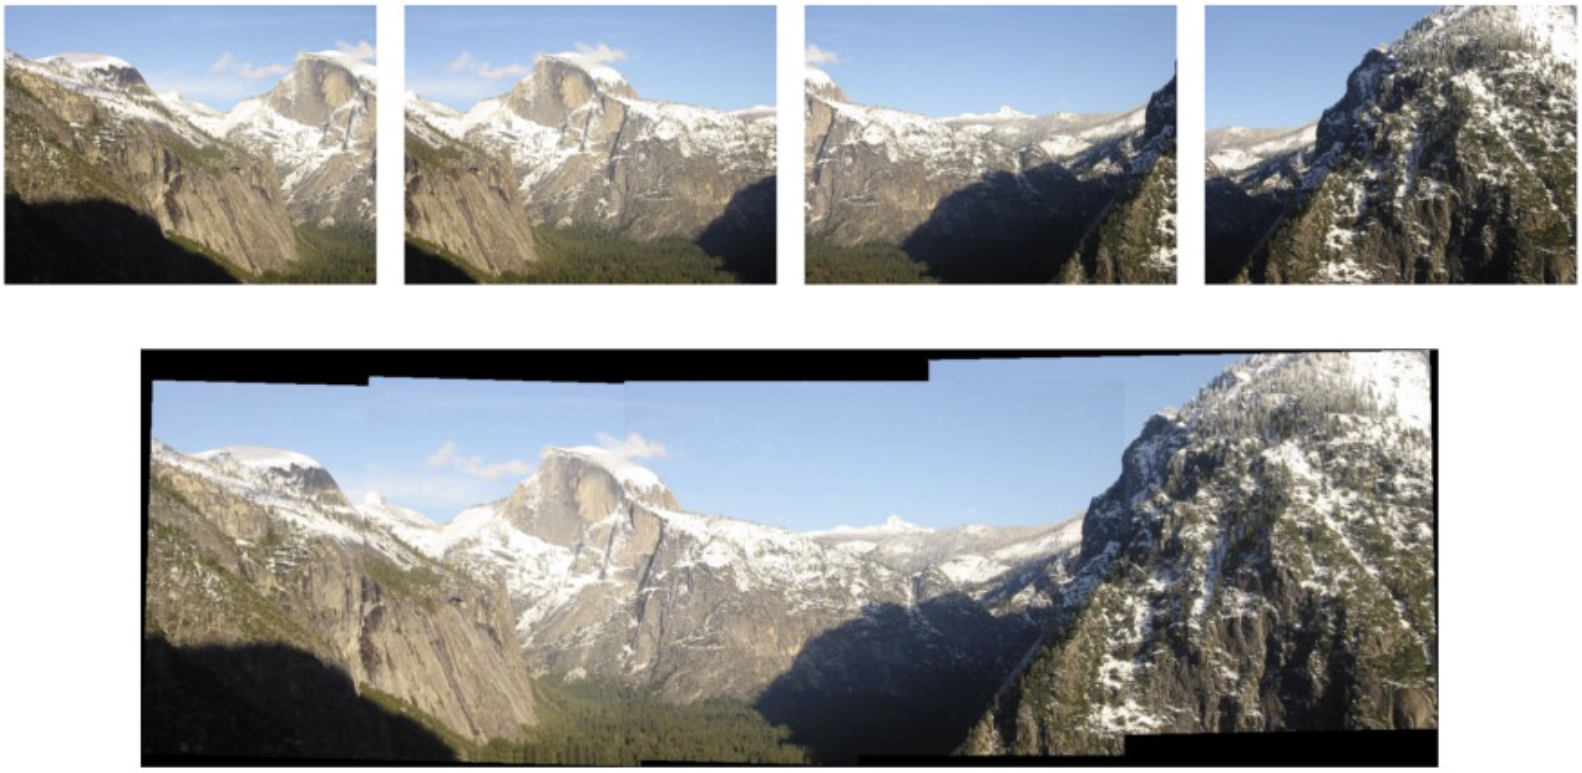 A collage of mountains with snow

Description automatically generated